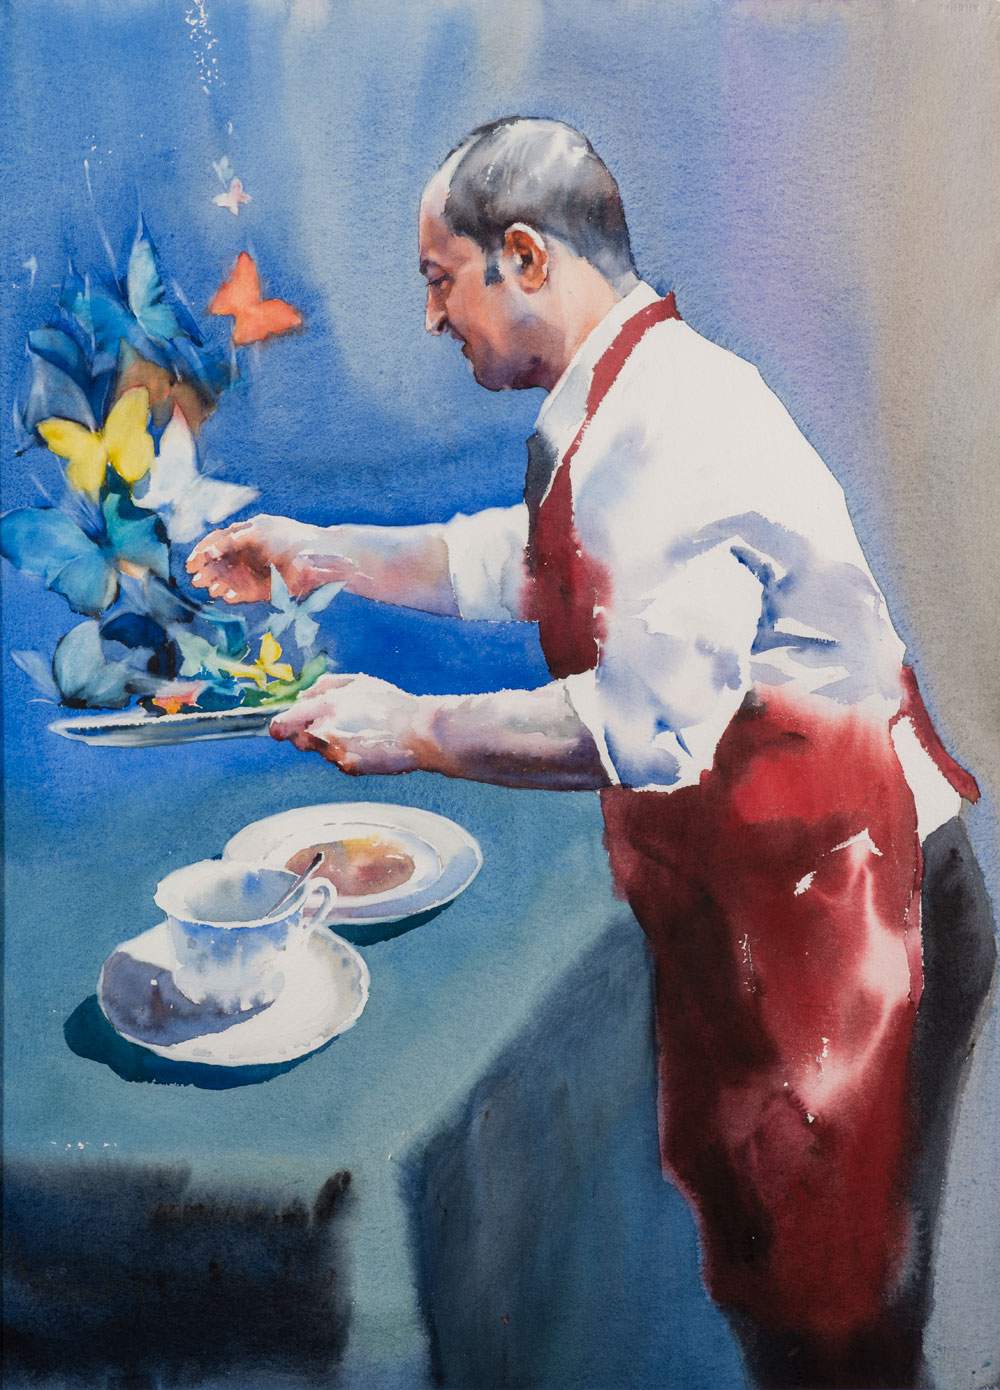 At WopArt 2019 ten watercolors anticipate Roman anthology of Russian artist Andrey Esionov